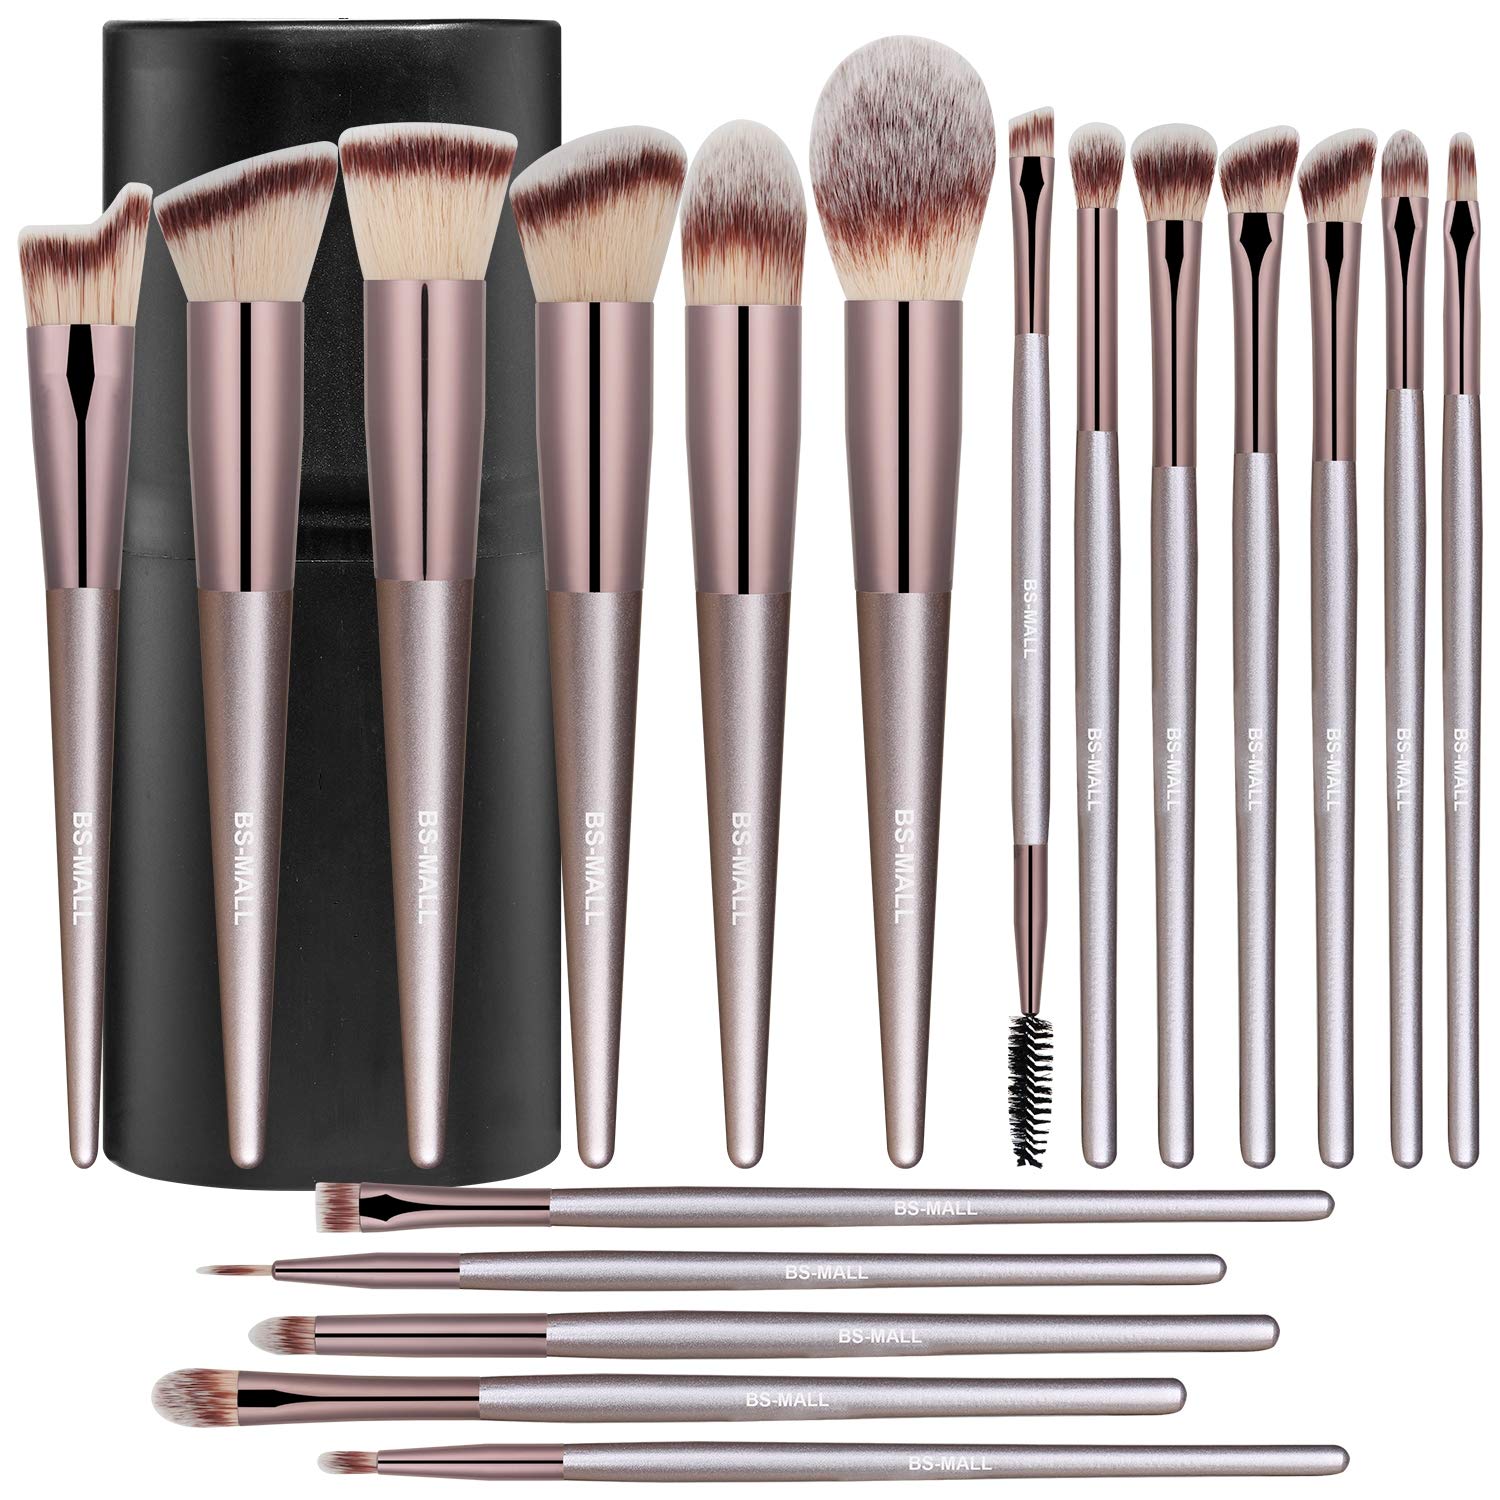 Premium Synthetic Makeup Brush Set by BS-MALL for Eyeshadow, Concealing, Blush, & Foundation - 18 Pcs